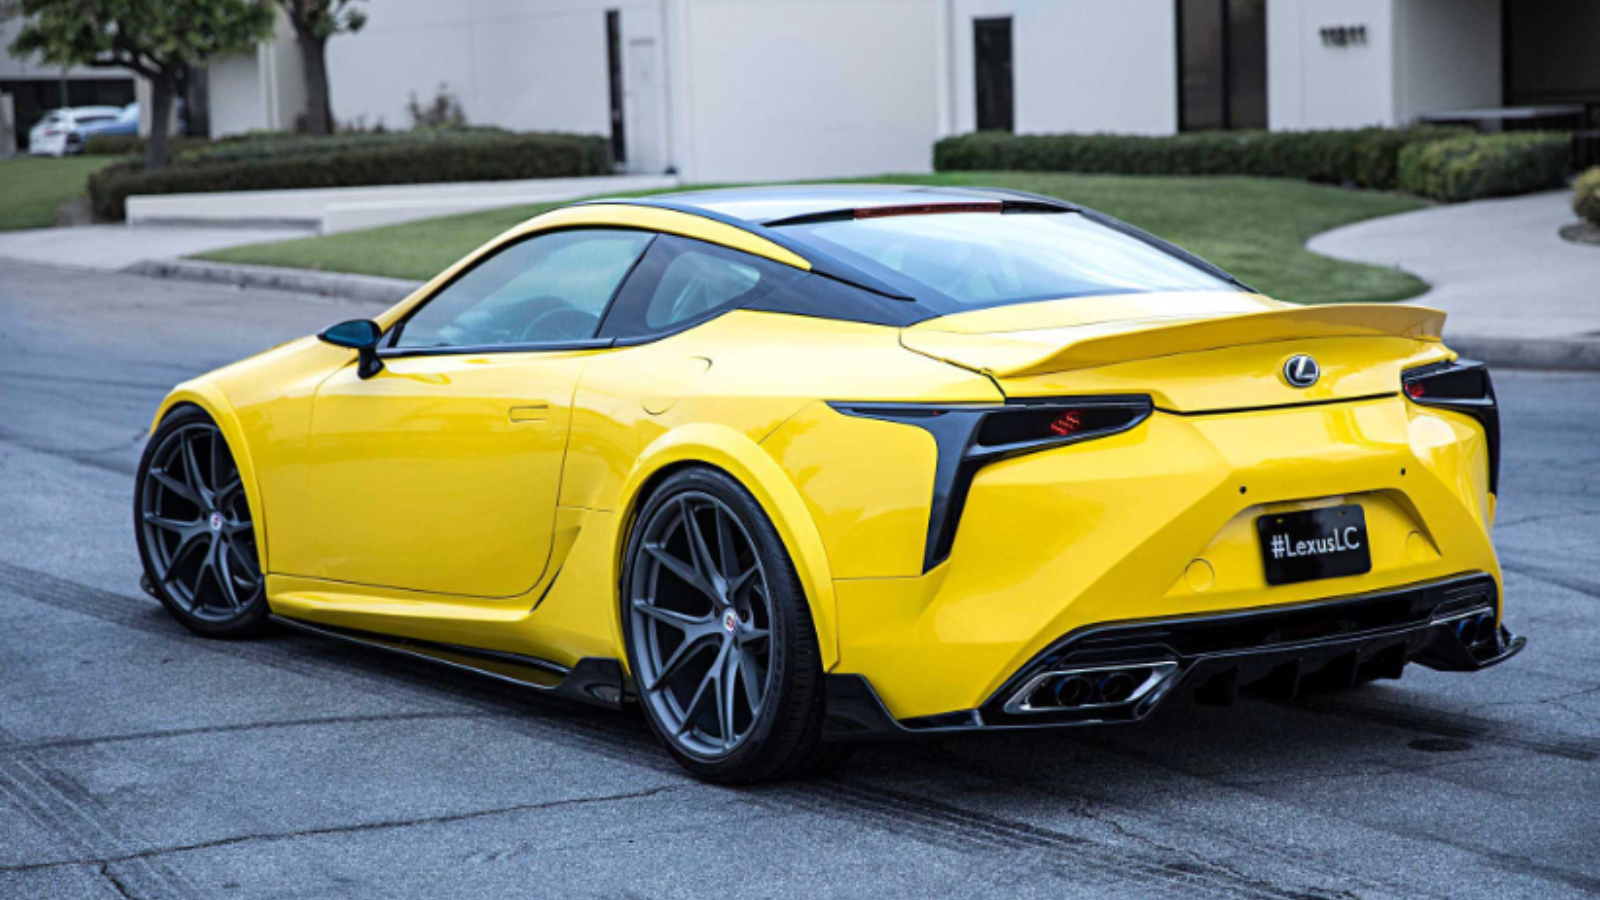 Not One But Two Modified Lc 500s Clublexus.